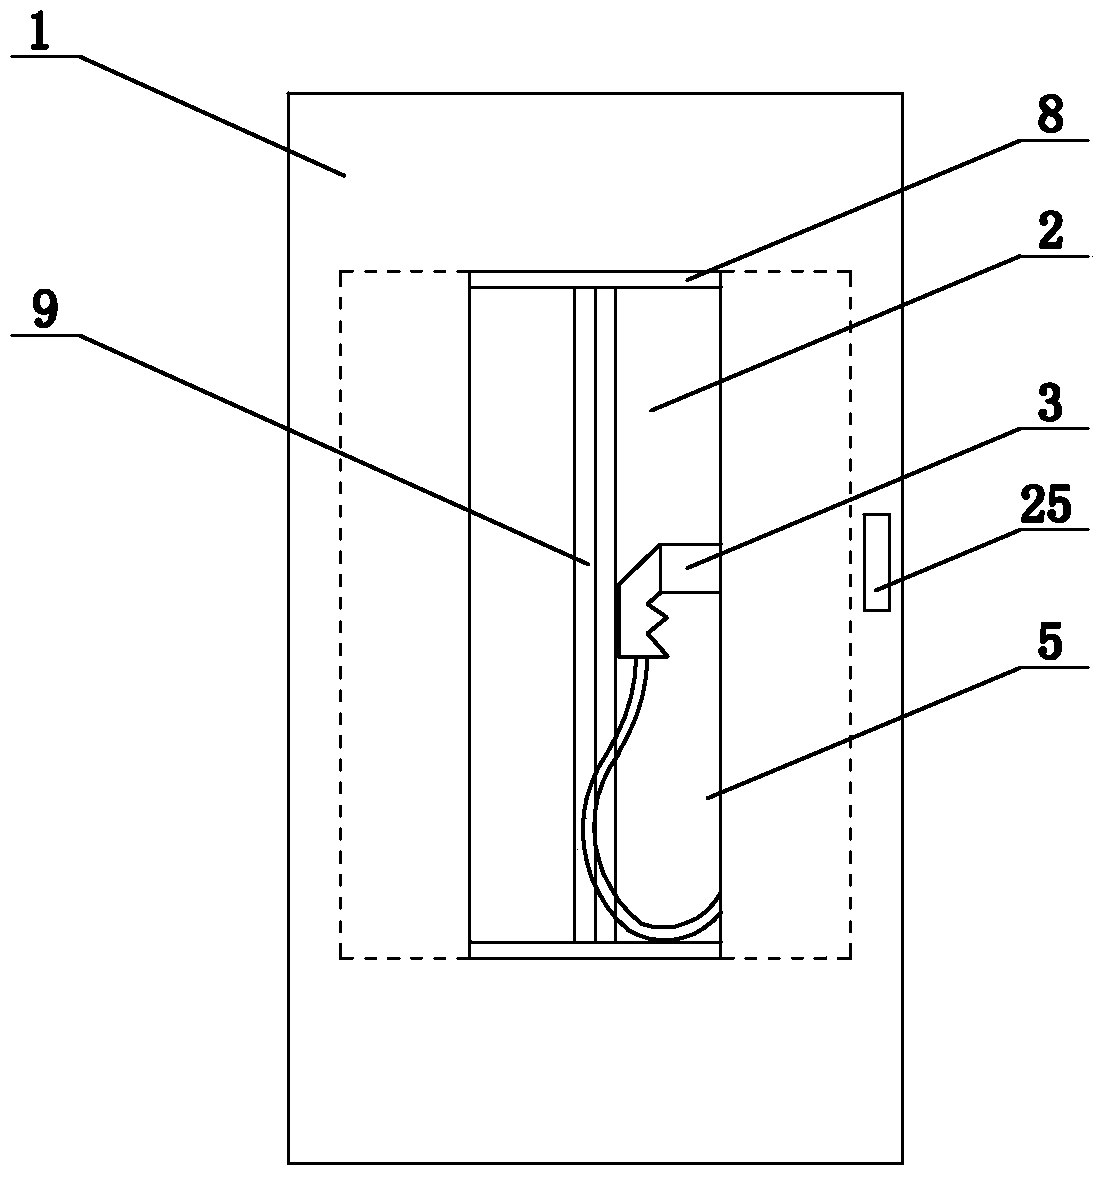 Special double-door protection device for intelligent charging pile in power system